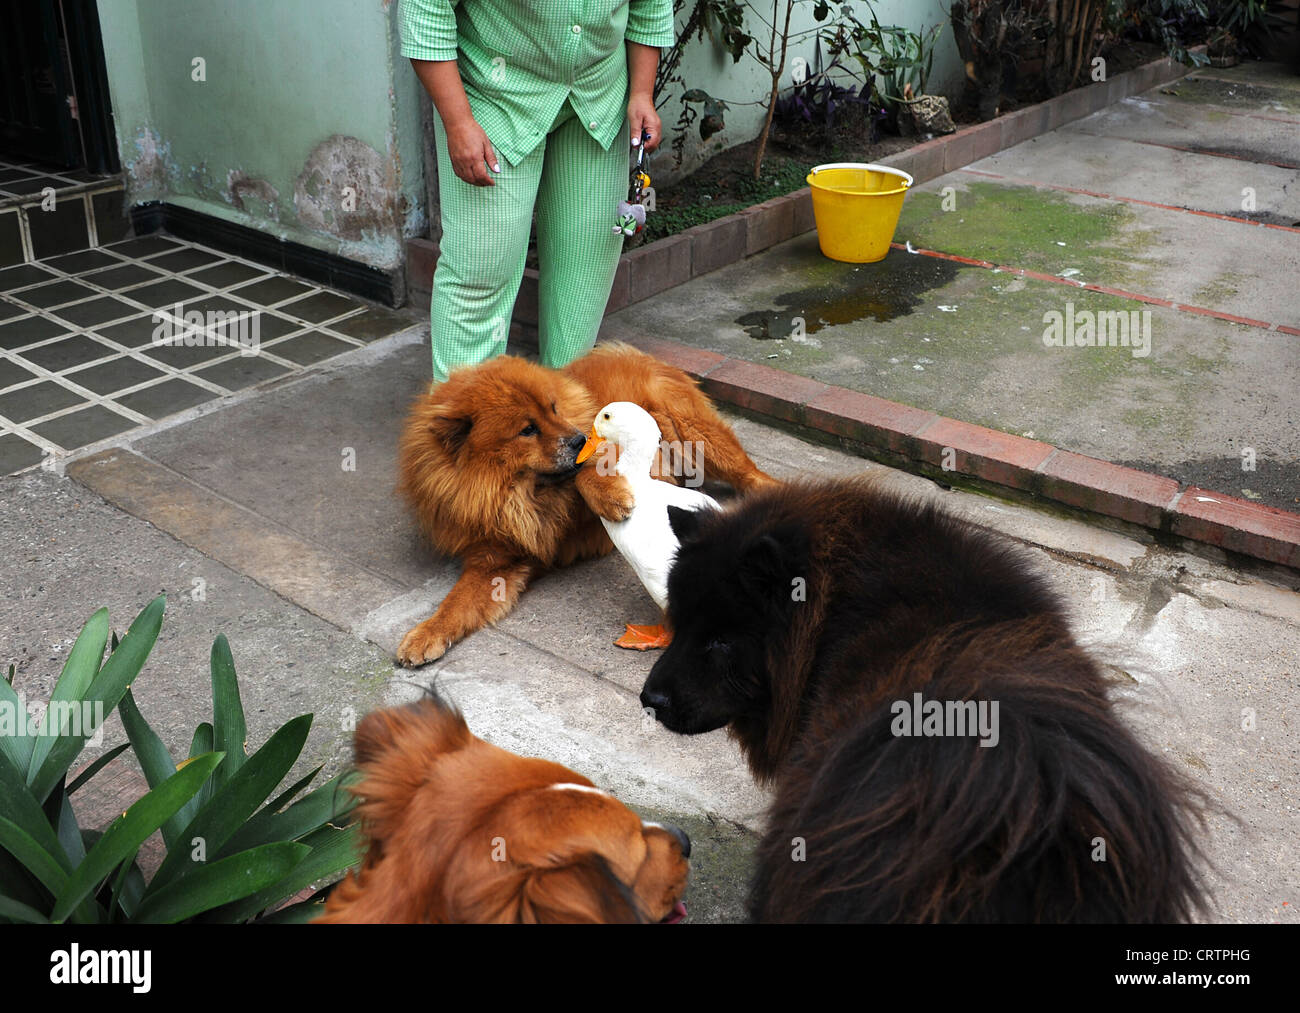 Three large dogs and a duck on patio in front garden in Fusagasuga, Colombia. Stock Photo